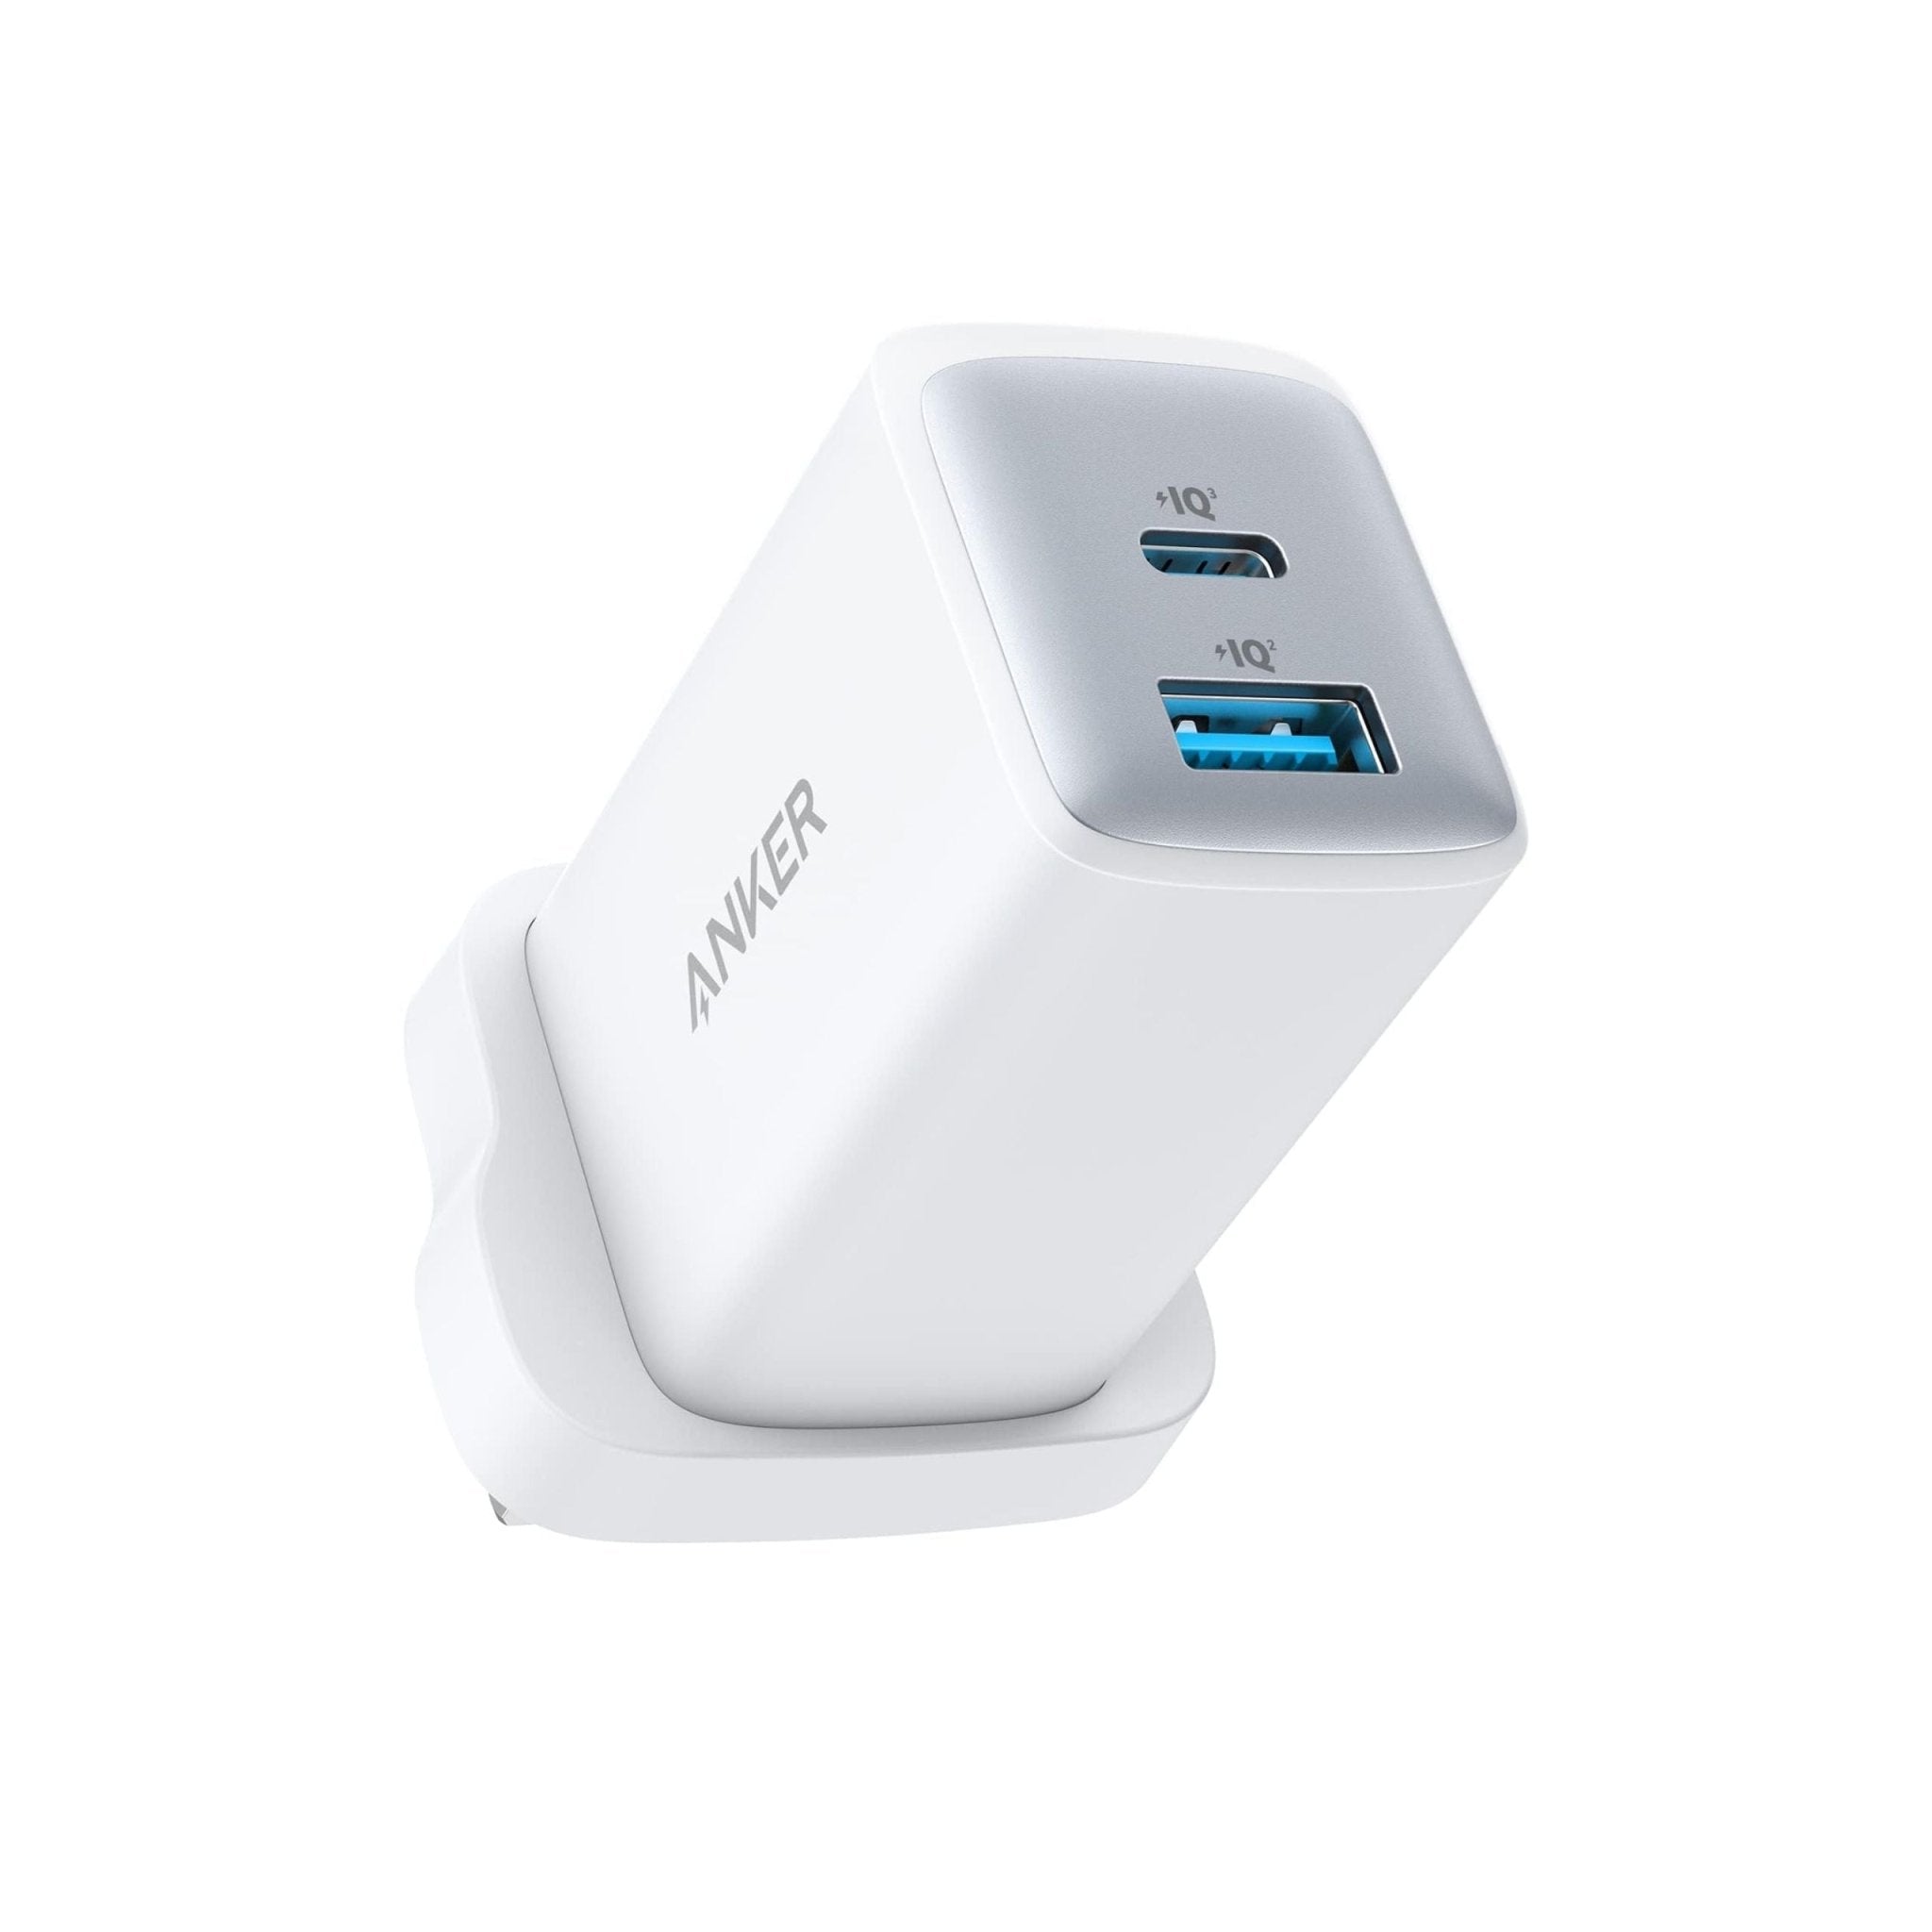 Anker 20W Dual Port High Speed Charger with USB C to USB C Cable 1.5m - White